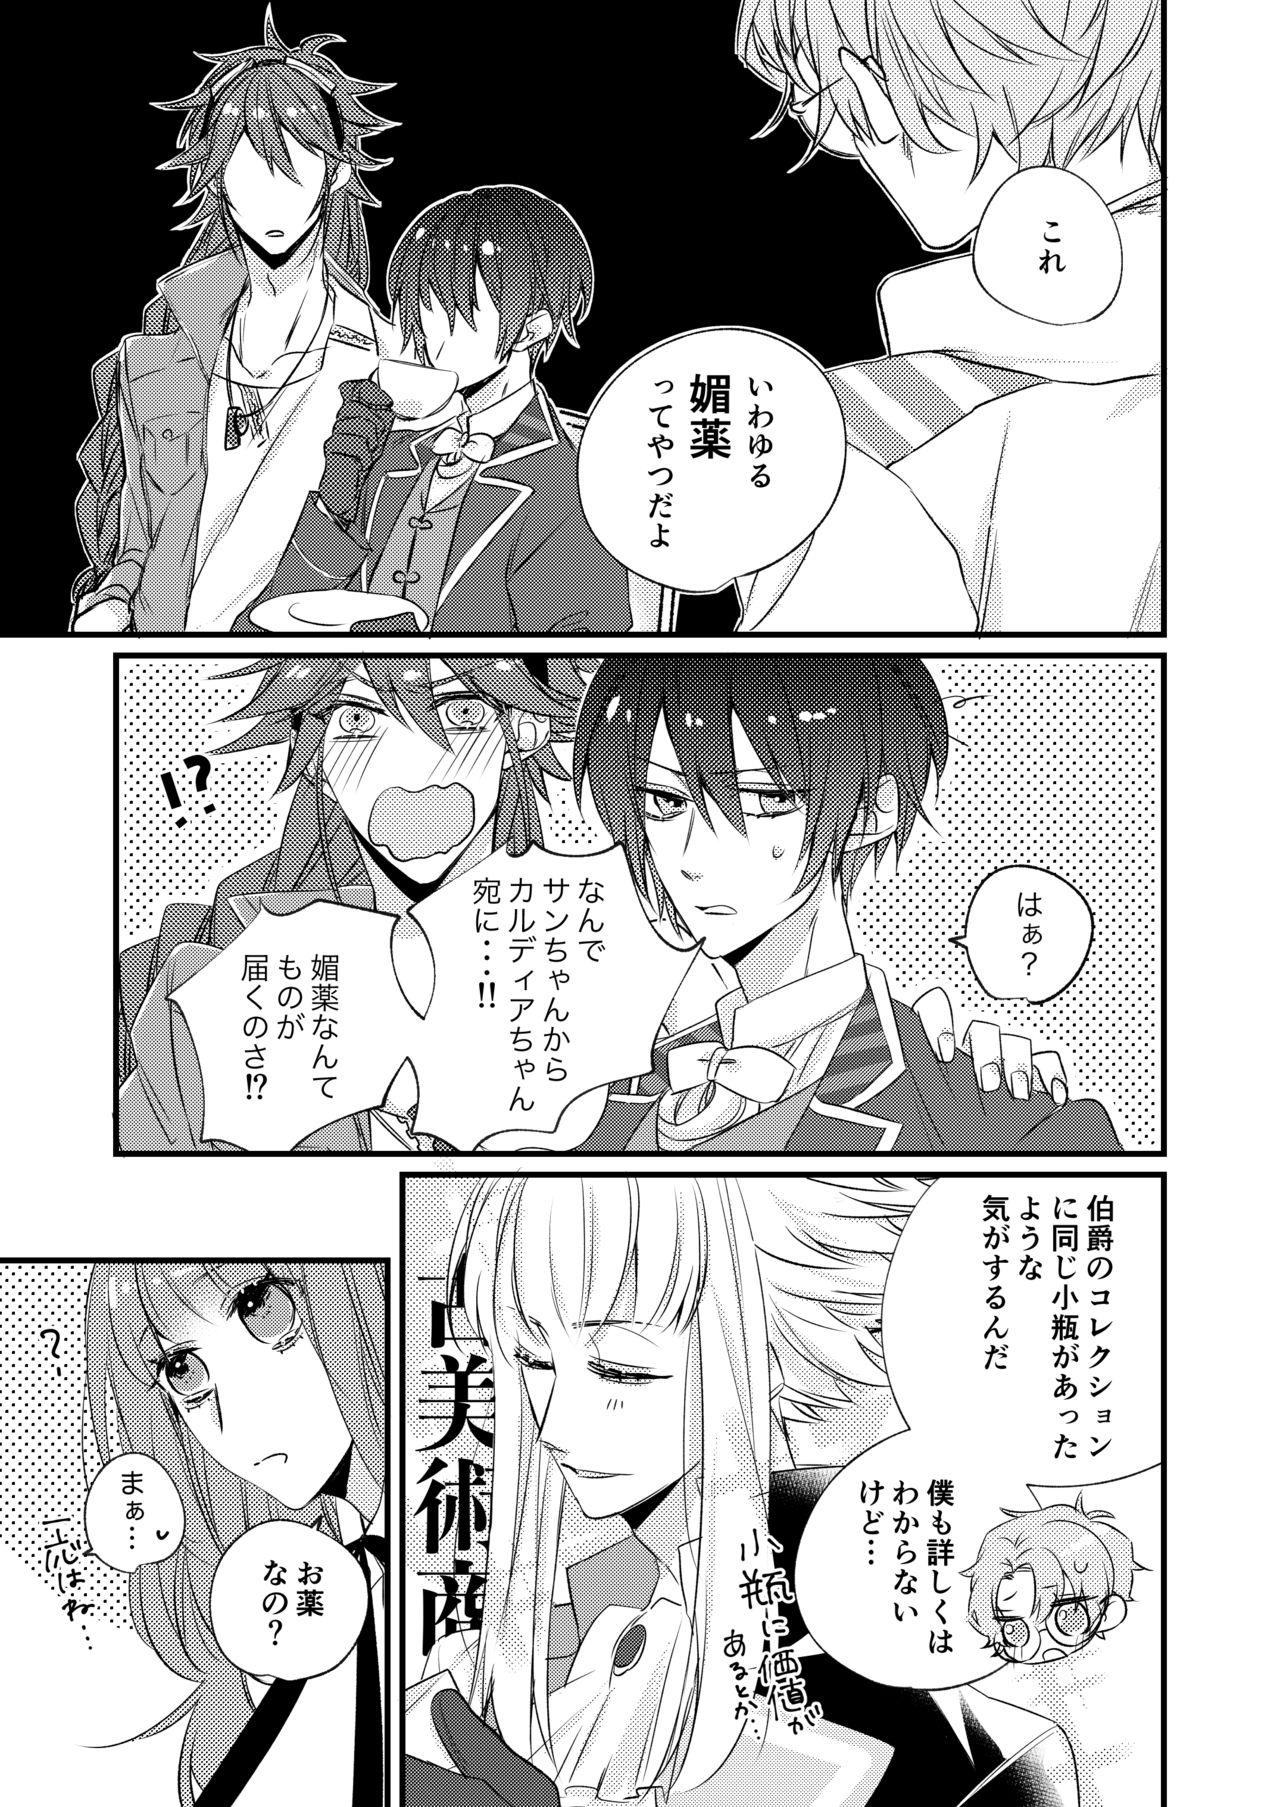 18yearsold 熱におぼれる - Code realize sousei no himegimi Curves - Page 4